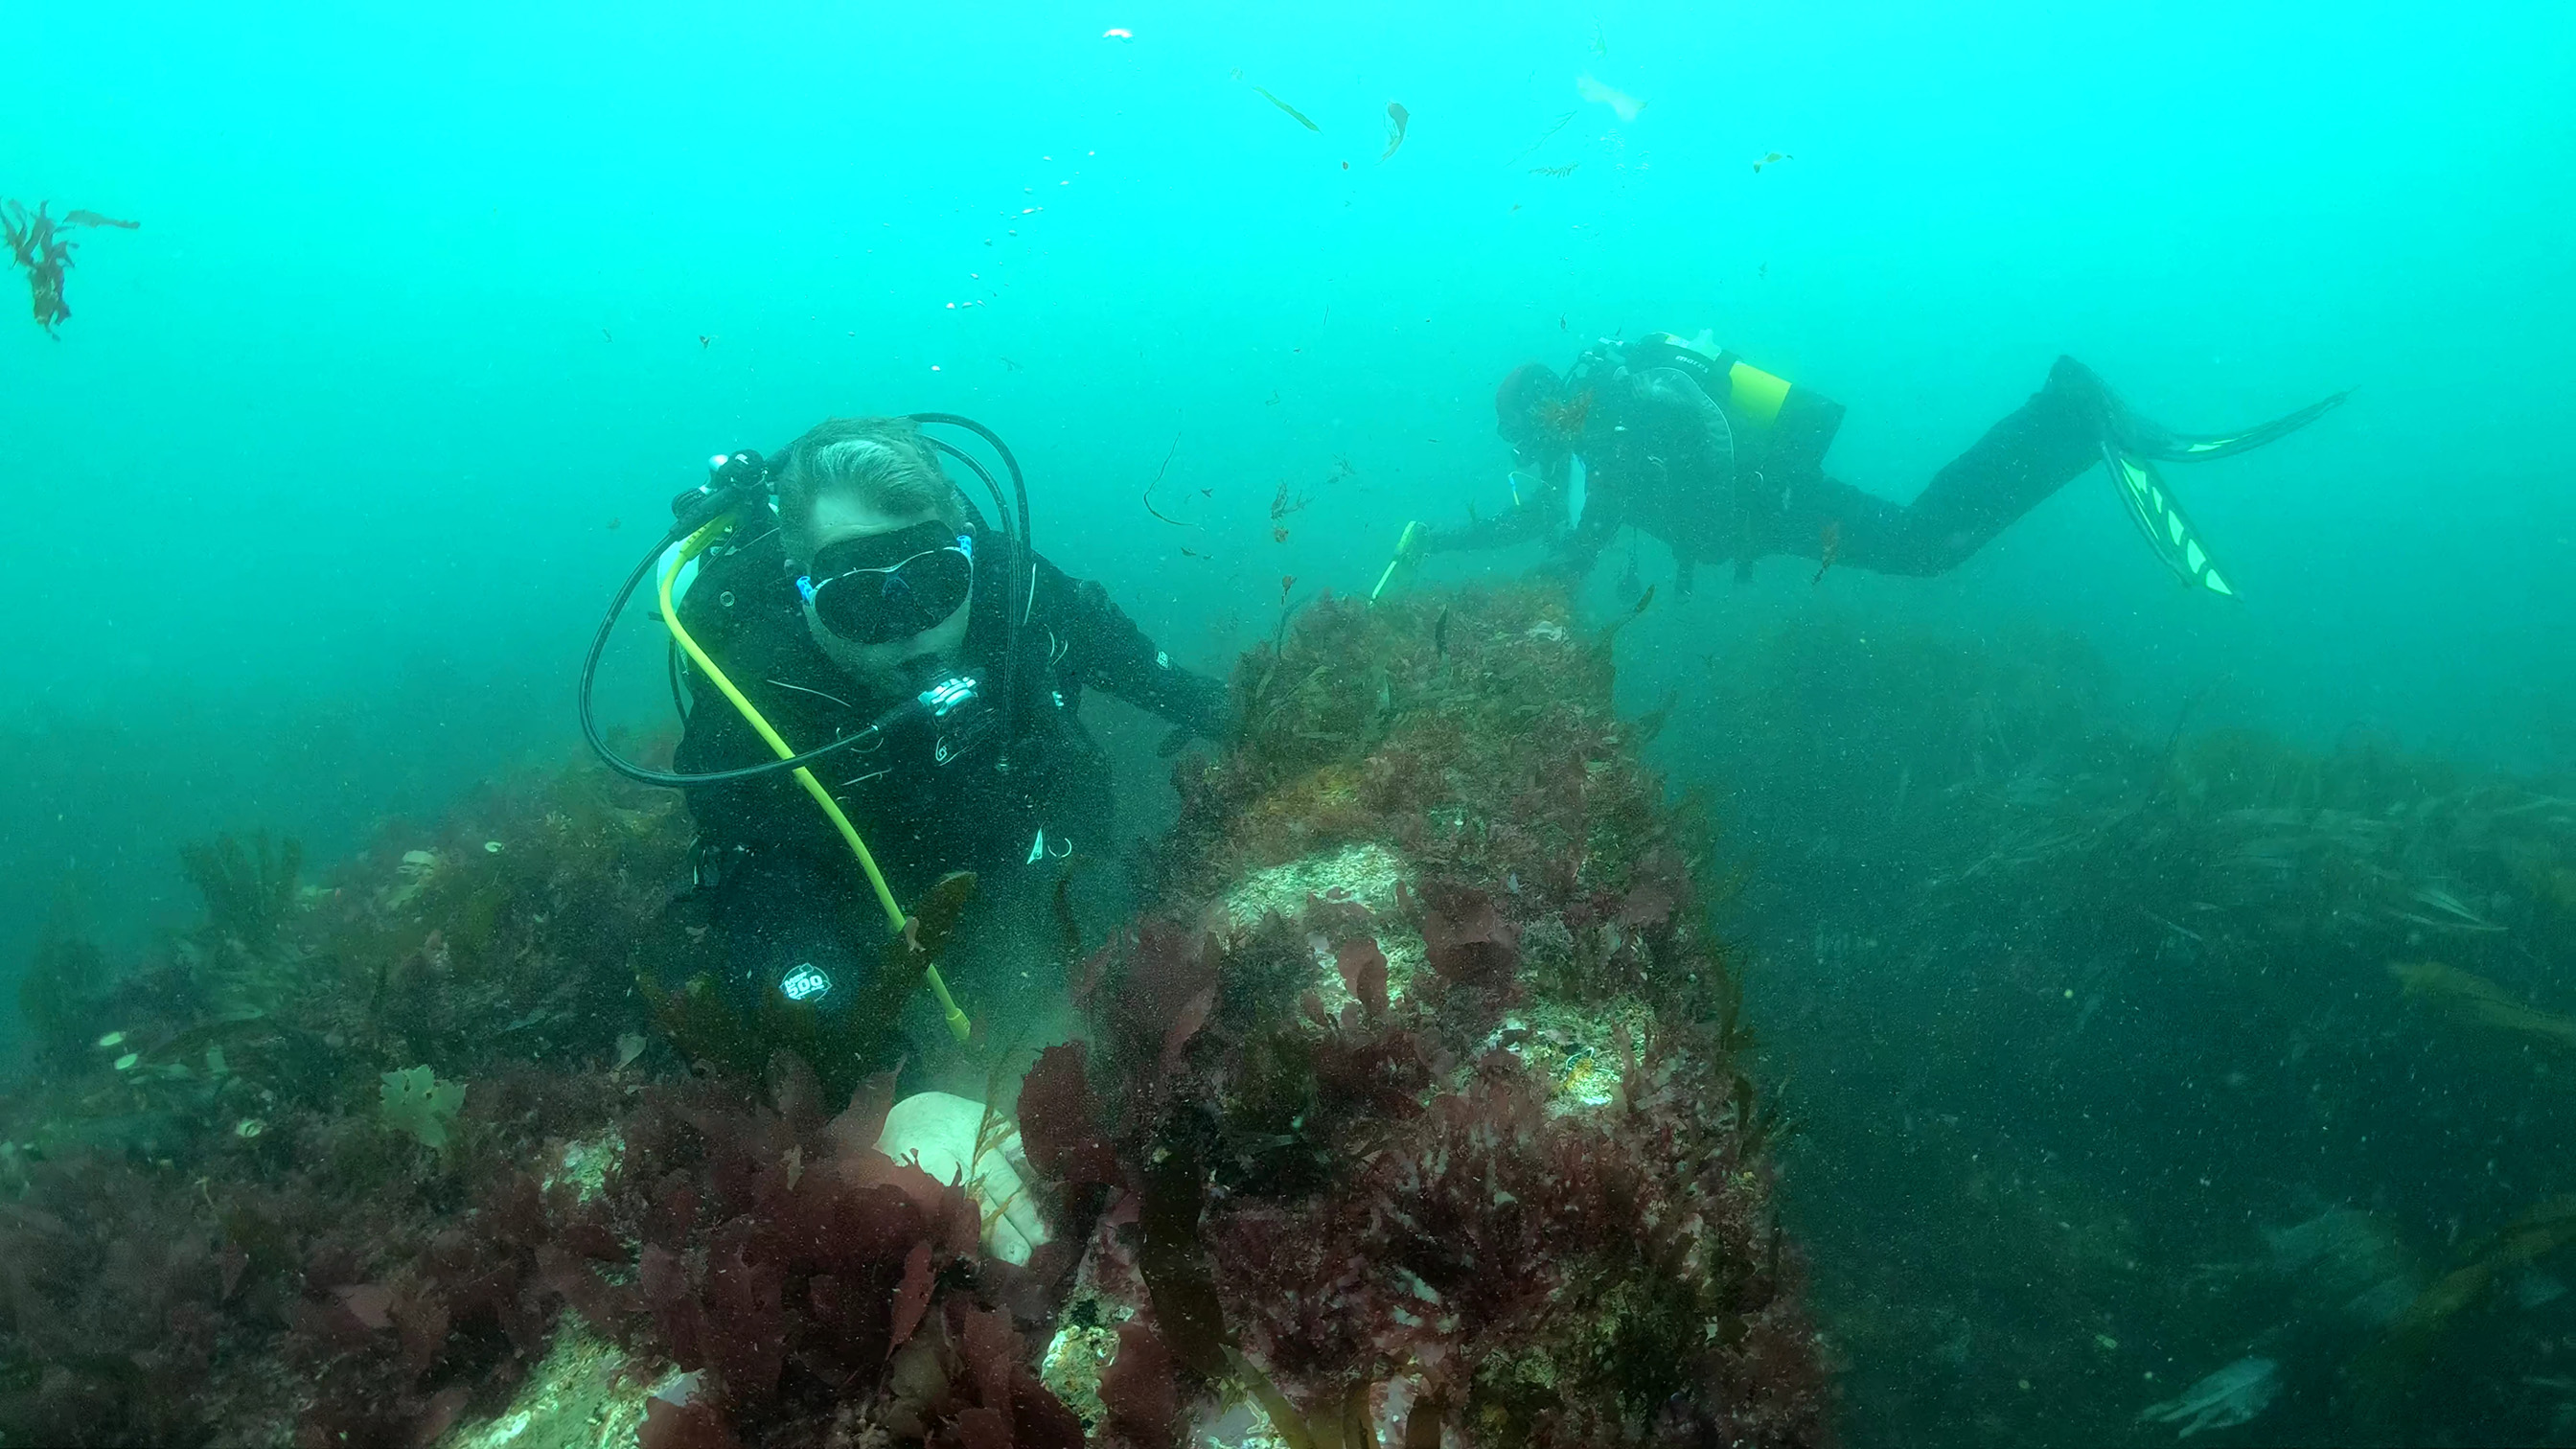 Two divers under water surveying part of a seaweed covered ship wreck on the sea floor.